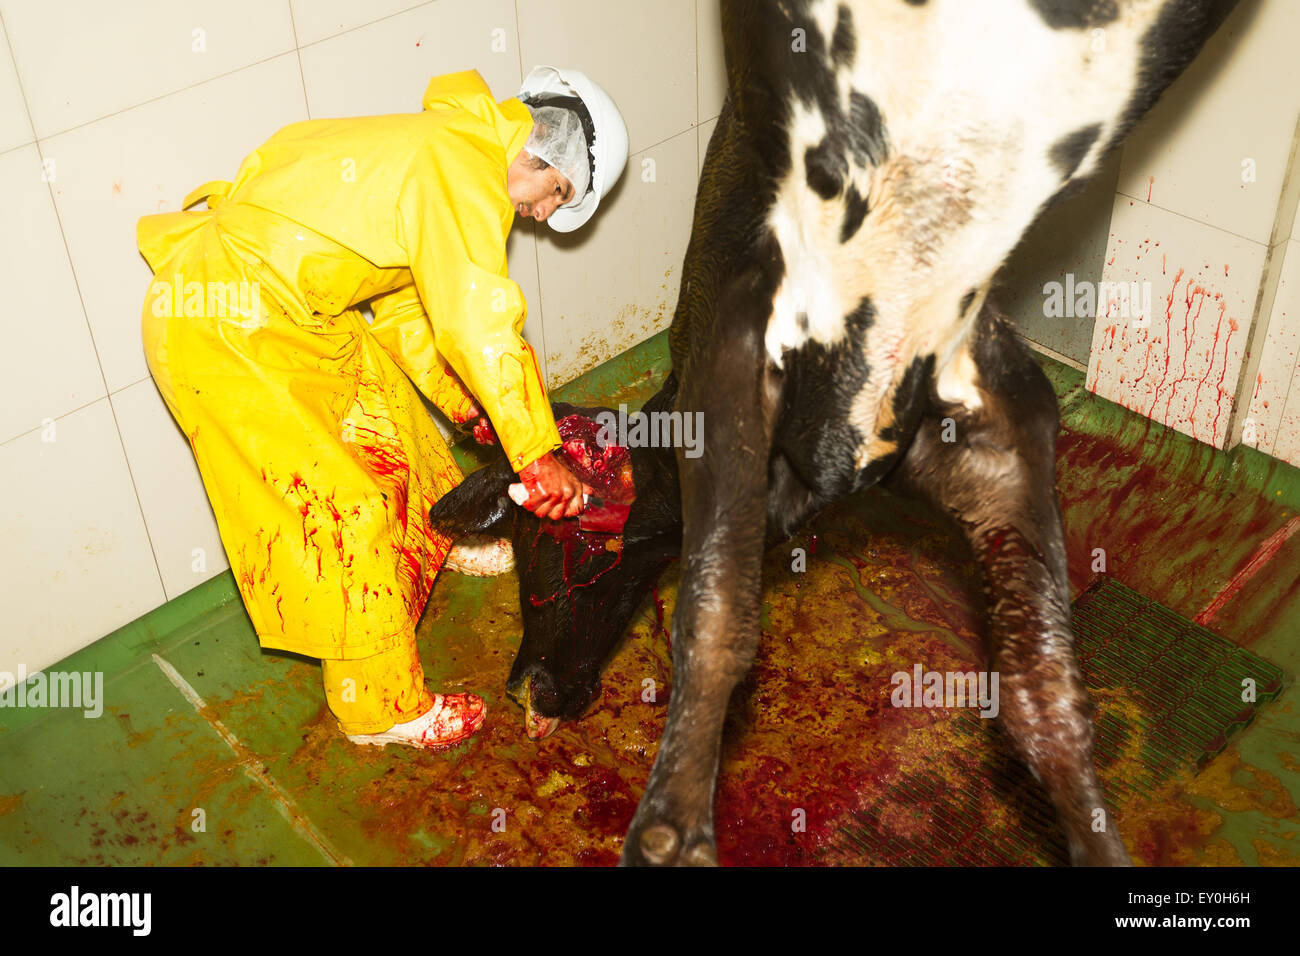 Slaughterhouse Butcher Decapitating A Cow On The Production Line Stock Photo